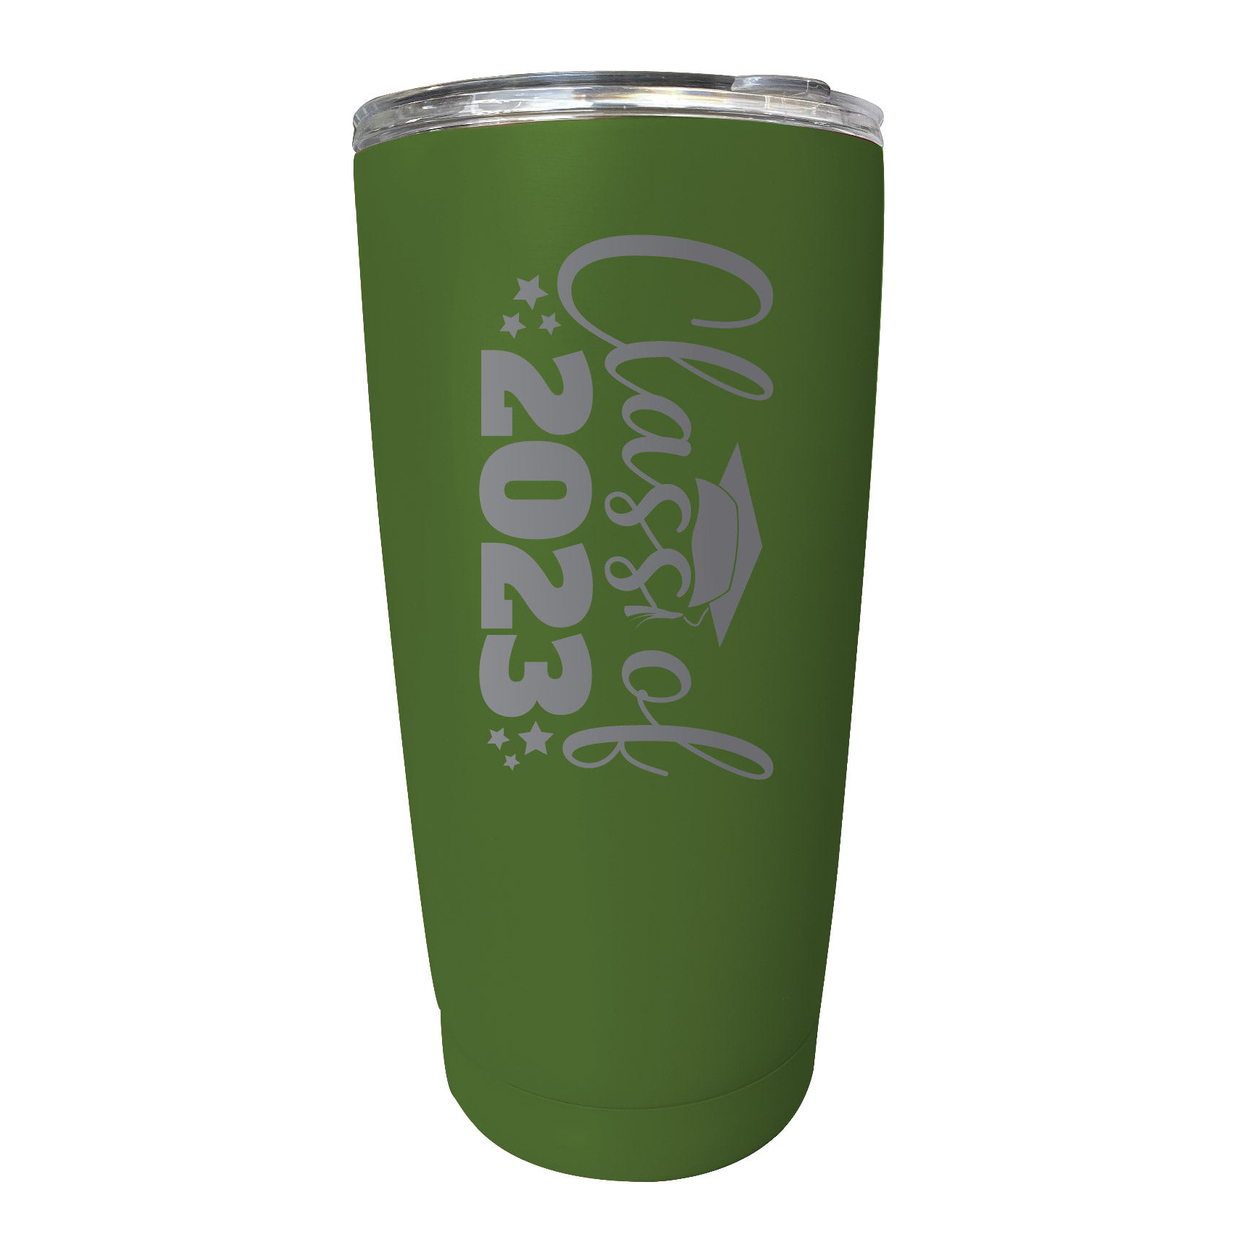 Class Of 2023 Graduation 16 Oz Engraved Stainless Steel Insulated Tumbler Colors - Green